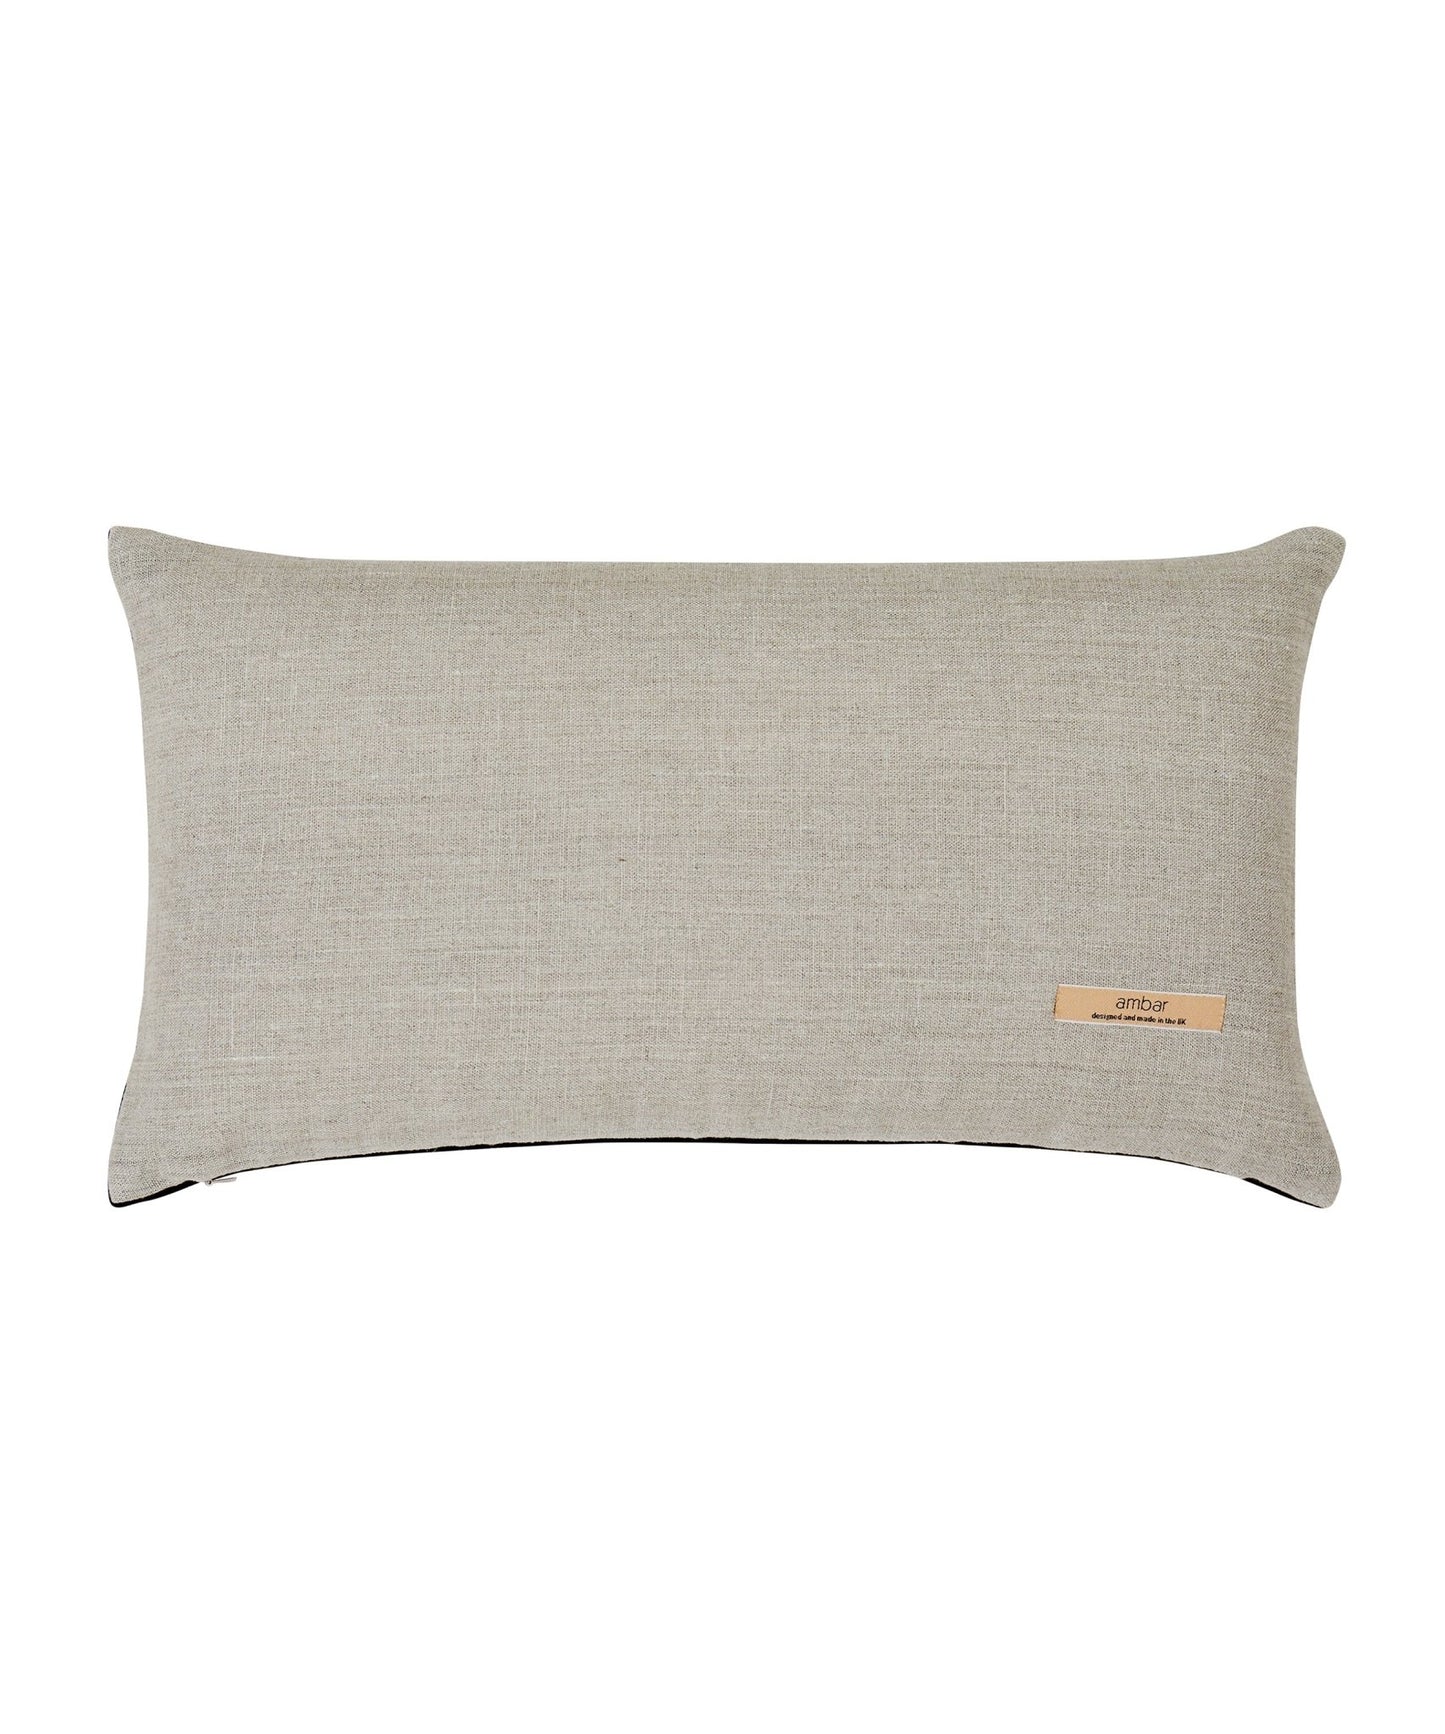 Green knitted Bolster Cushion Cover - Ambar Homeware - Linen backing - sewing in the UK